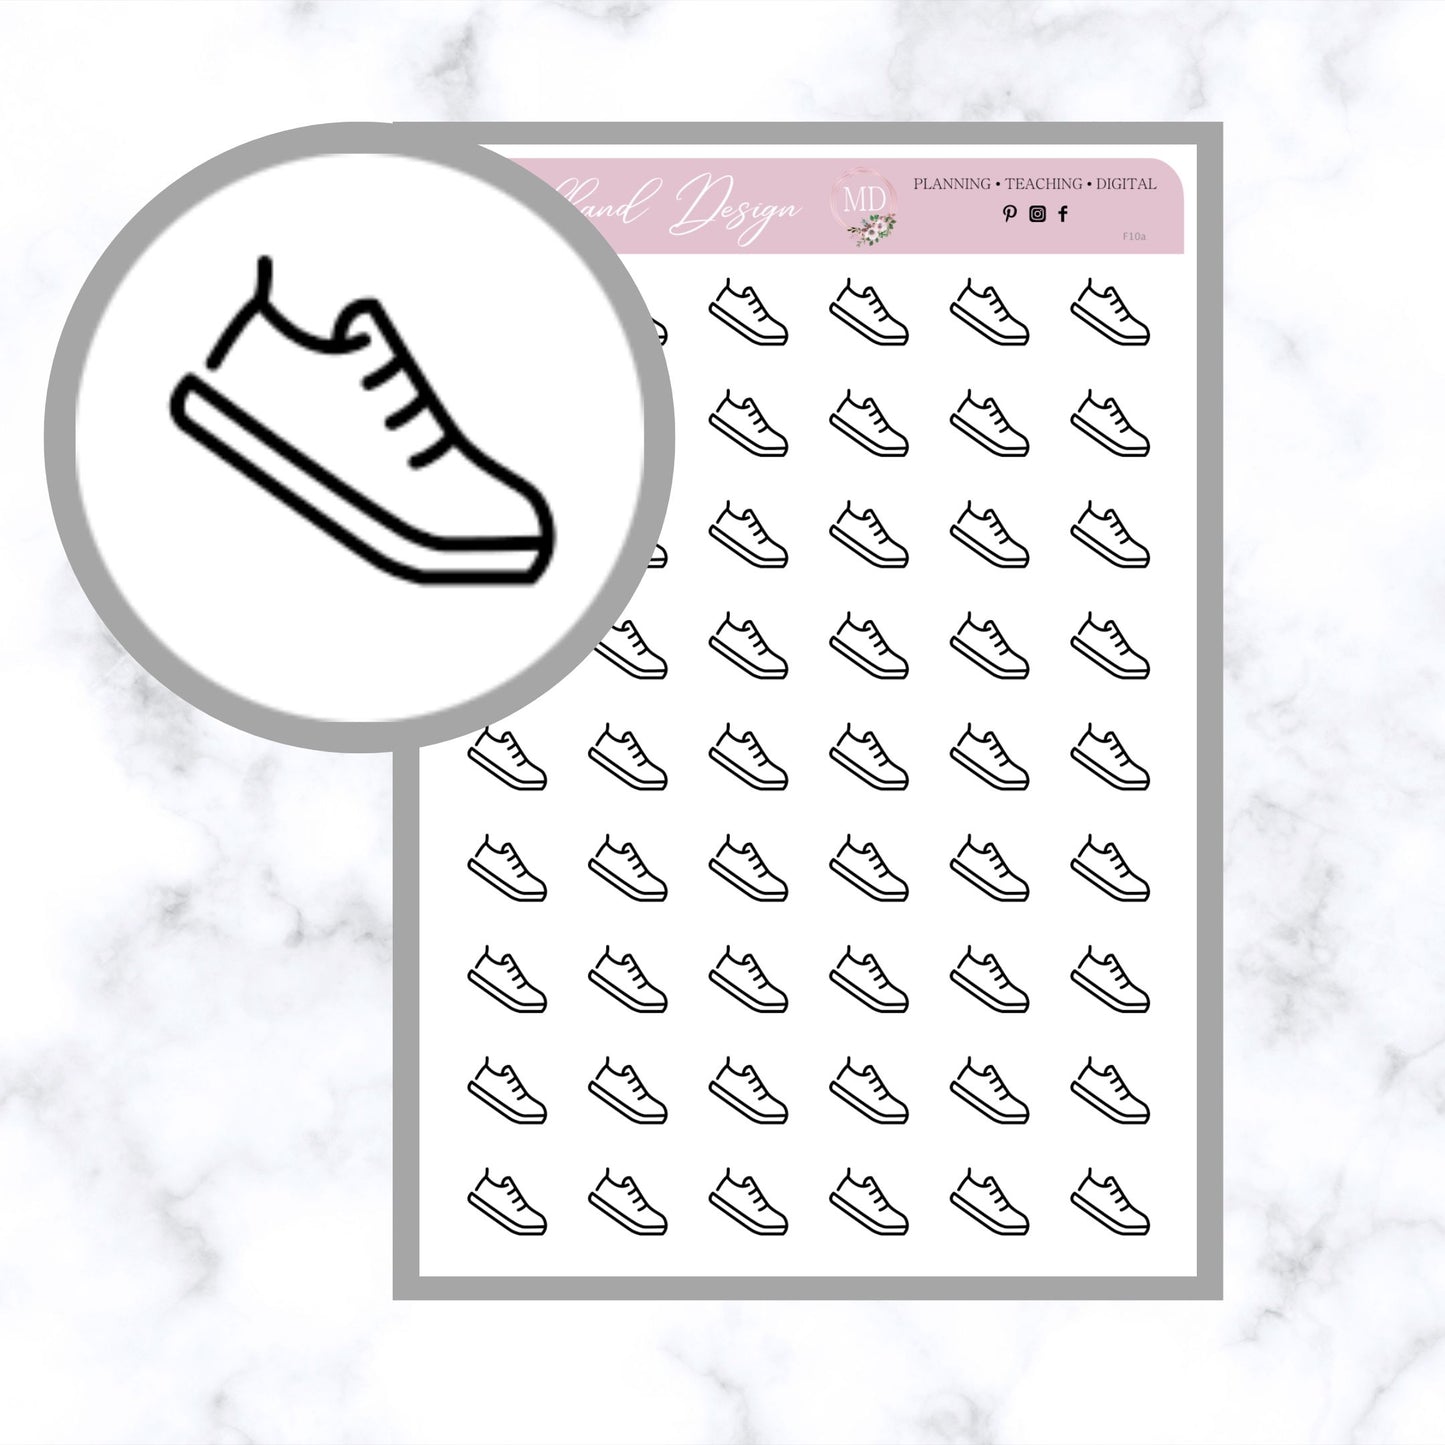 Run / Walk Icons for Planners